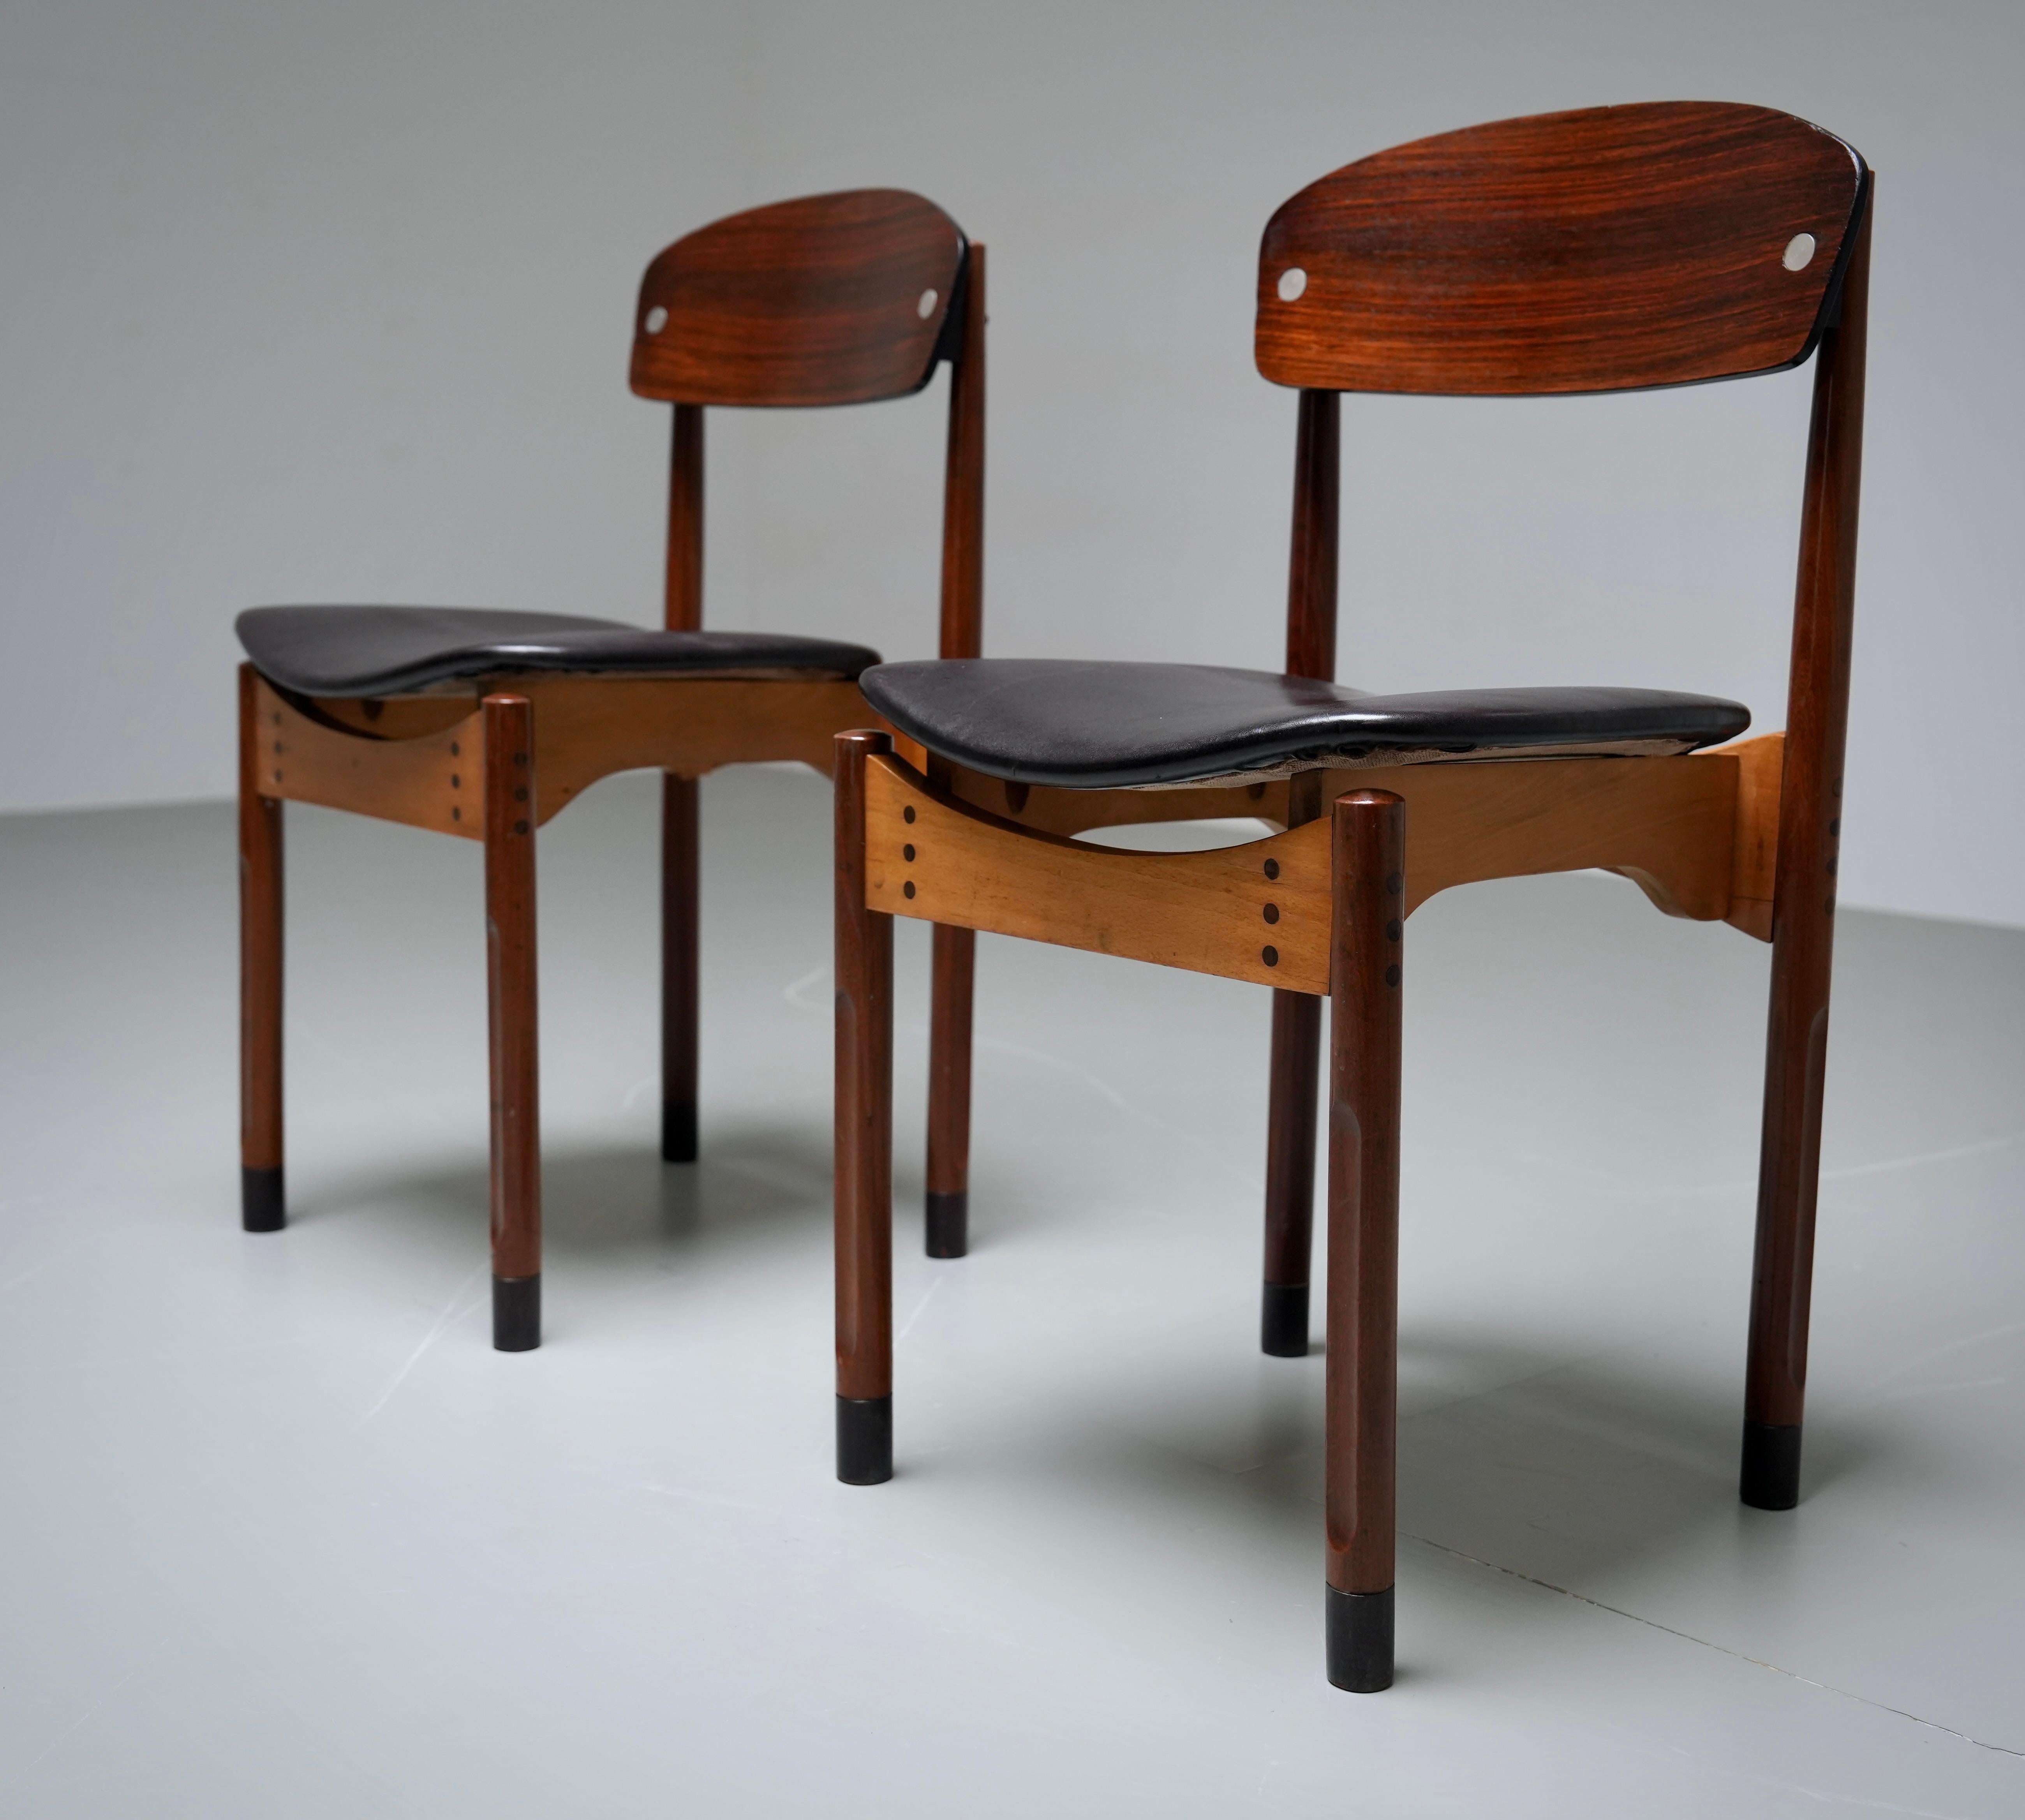 Mid-Century Modern Set of 2 Diningroom Chairs in Teak, Mahogany and faux leather, Italty, 1960's For Sale